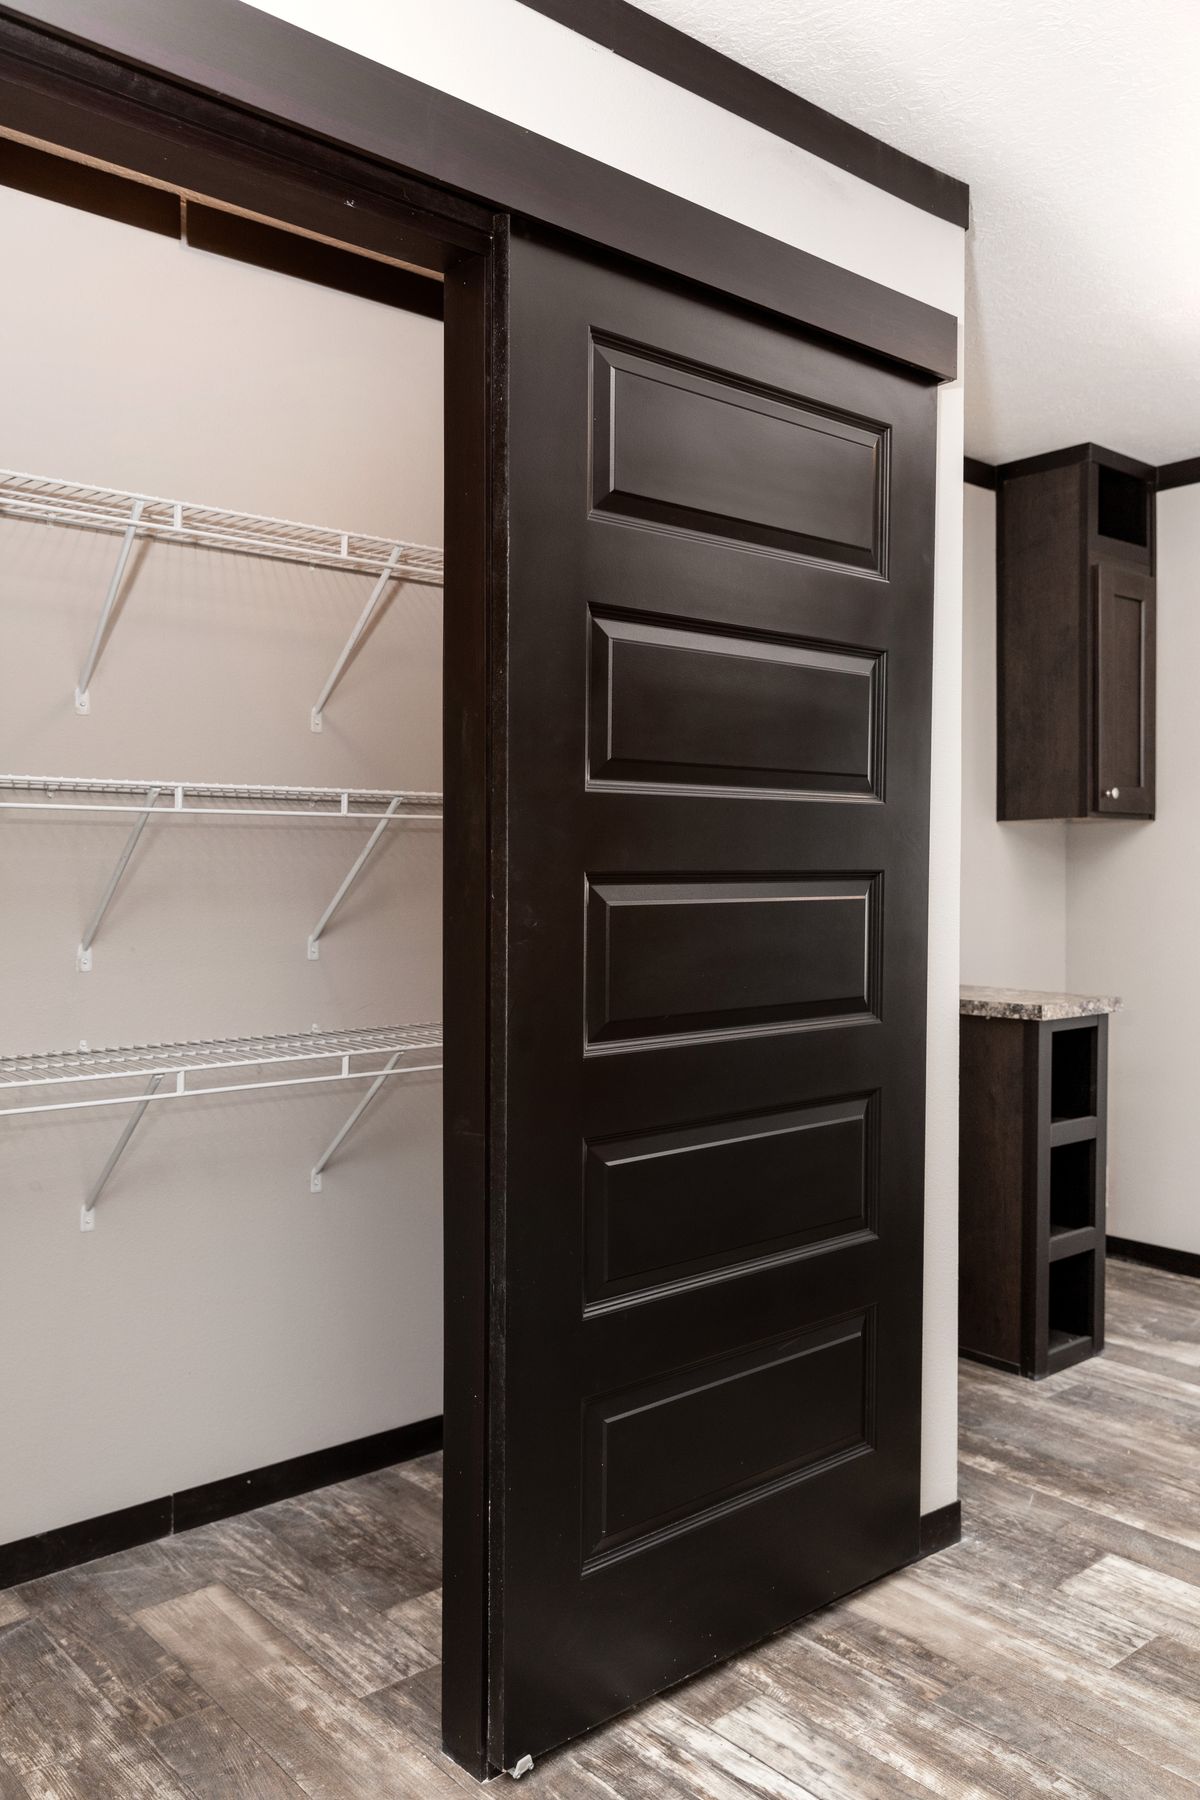 The THE FRANKLIN XL Utility Room. This Manufactured Mobile Home features 4 bedrooms and 2 baths.